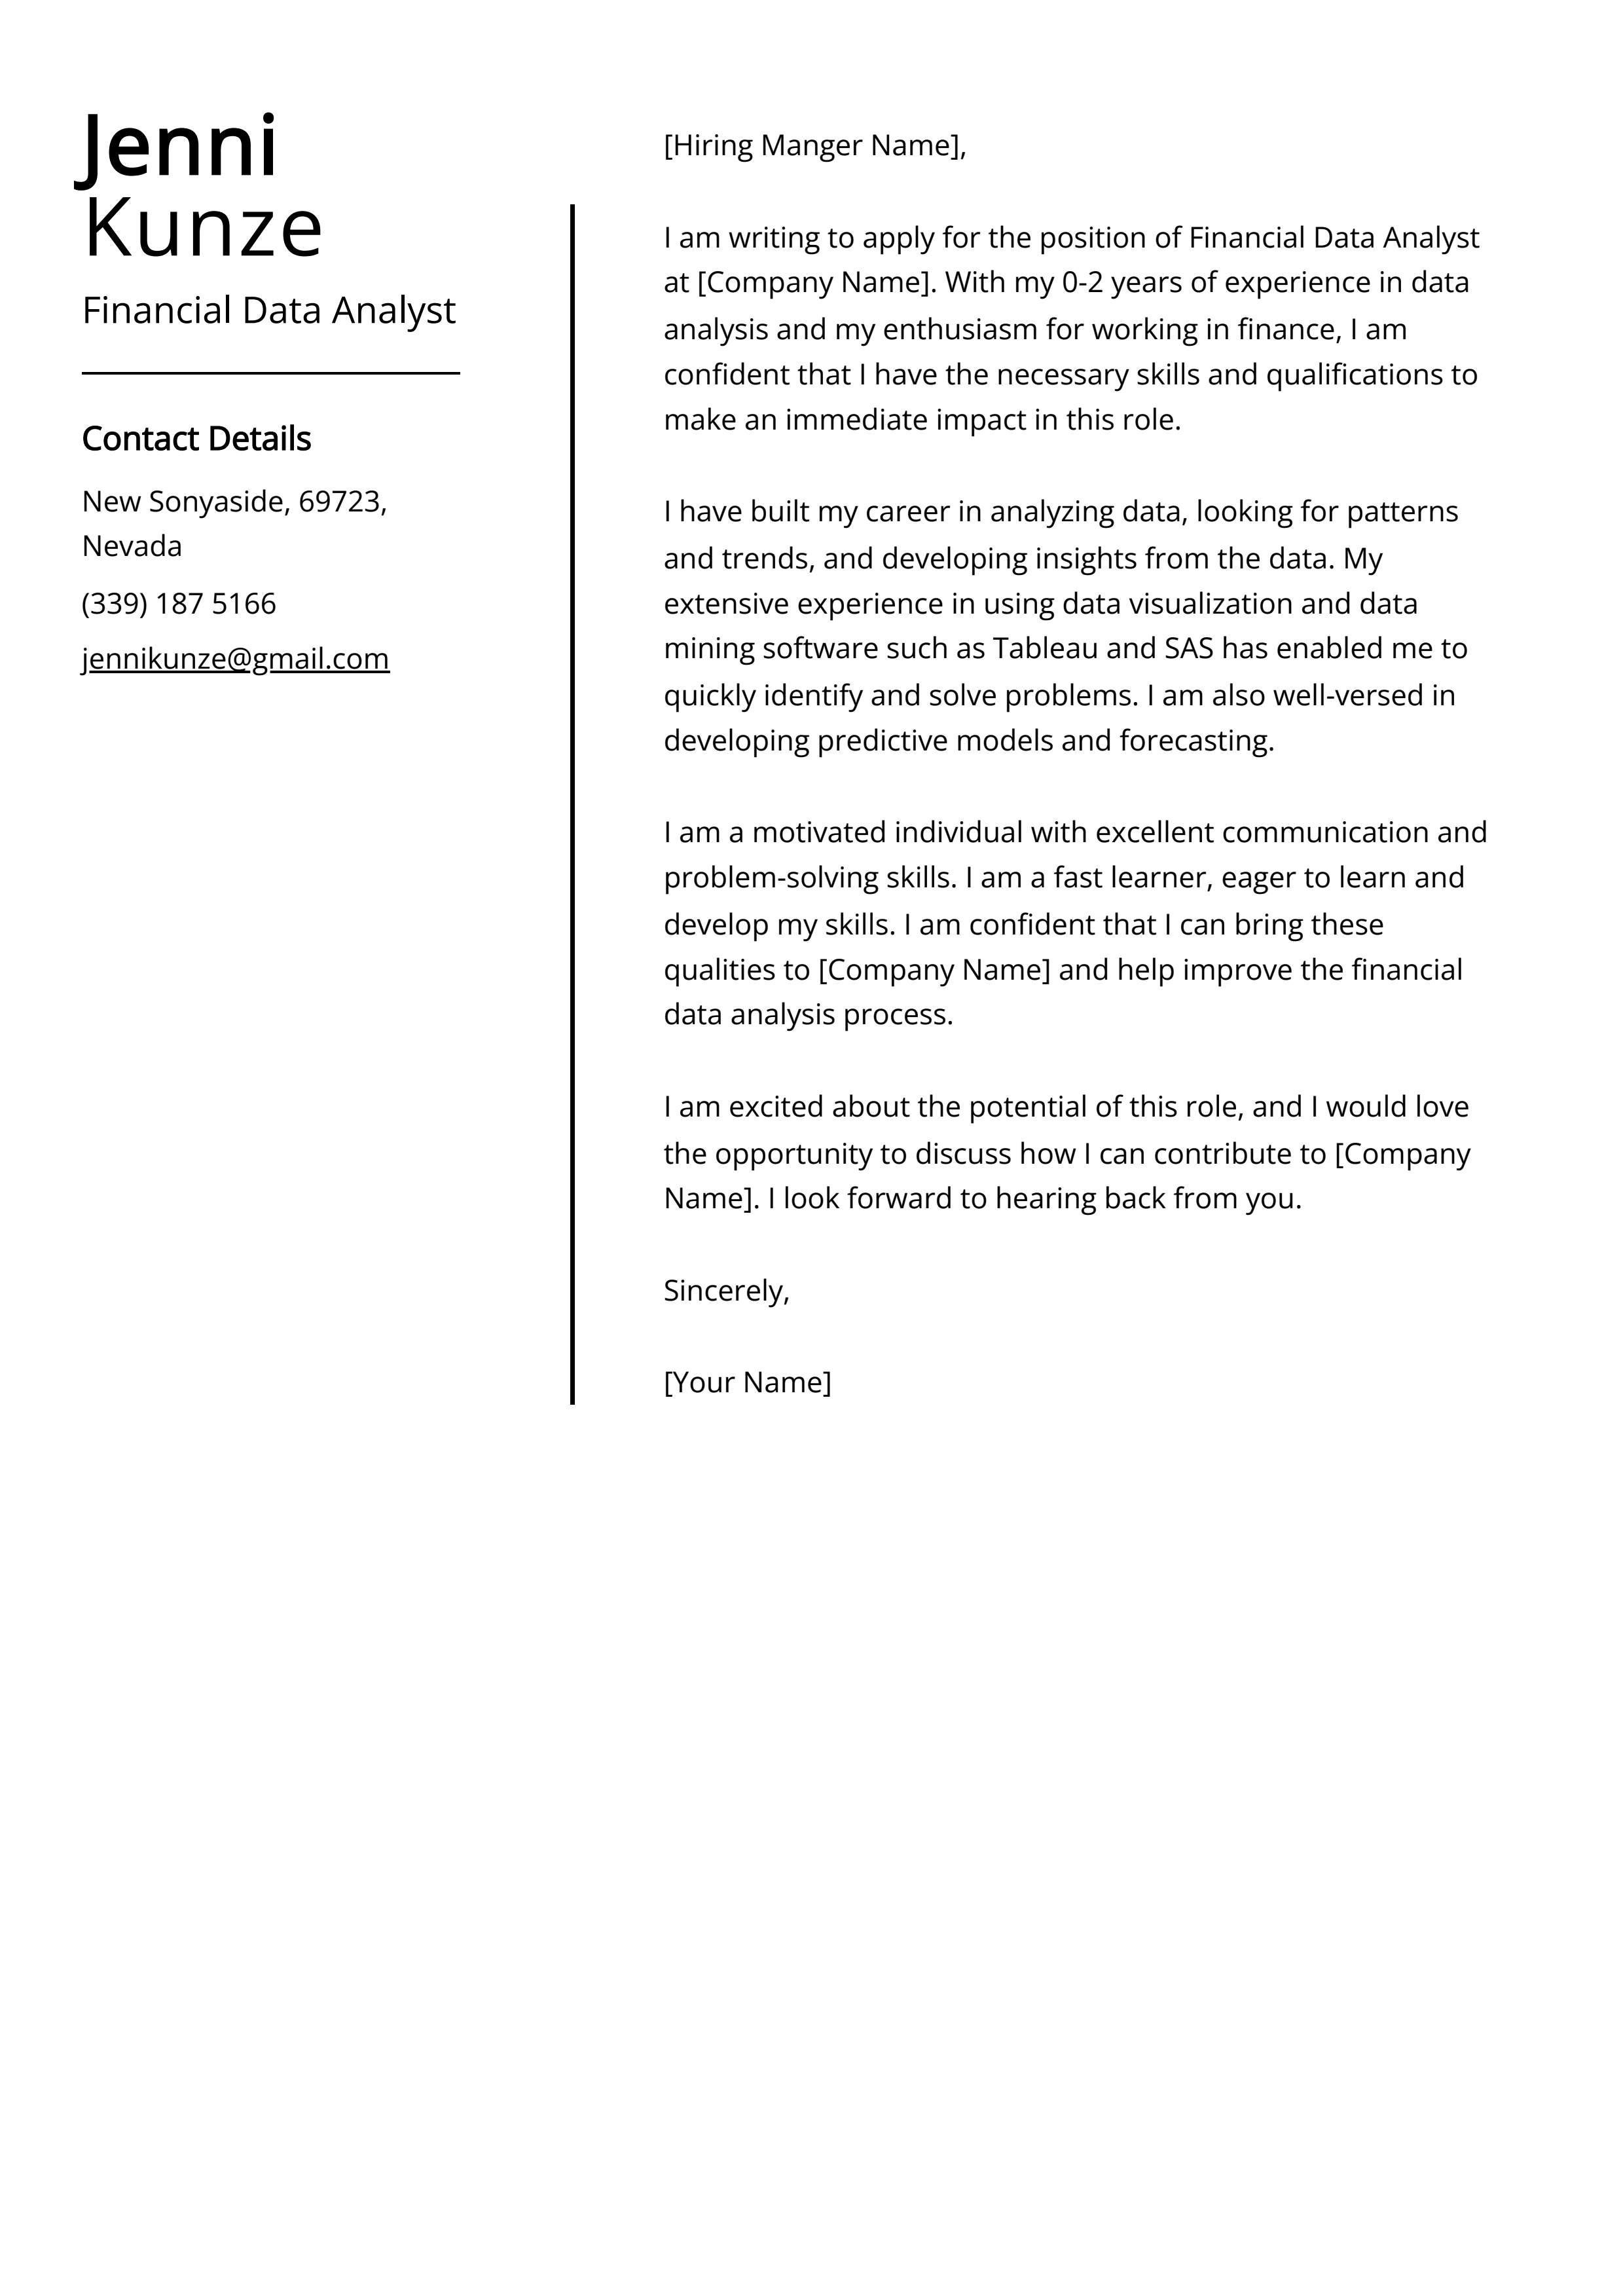 Financial Data Analyst Cover Letter Example